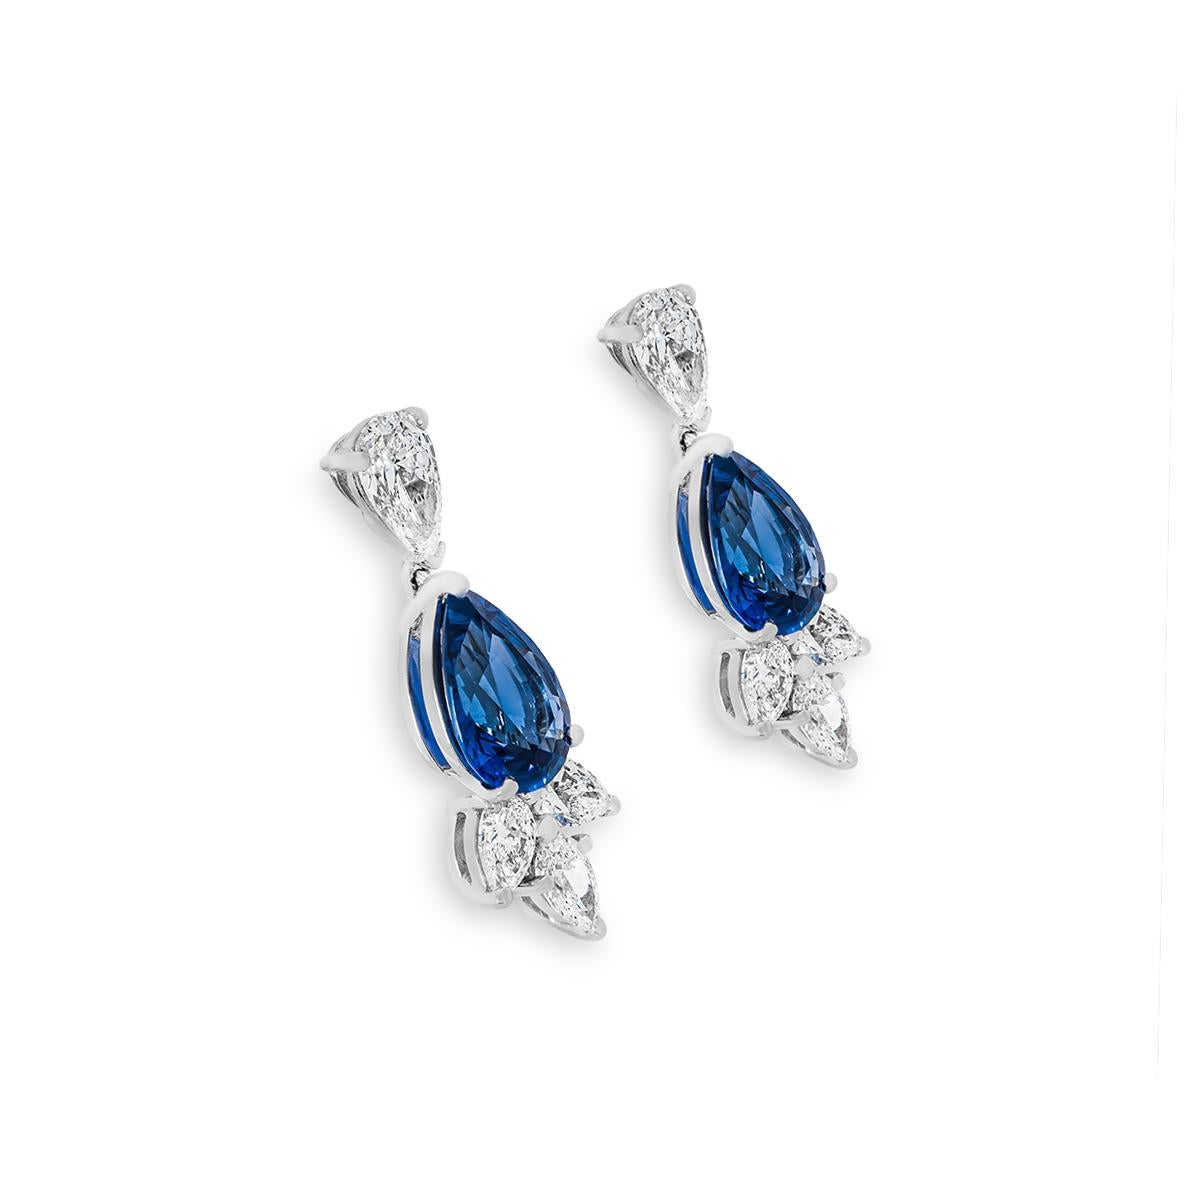 A regal pair of platinum sapphire and diamond drop earrings. Set to the centre of the earrings are pear cut sapphires with an approximate total weight of 3.67ct and displaying a velvety blue hue. Complementing each sapphire is a single pear cut